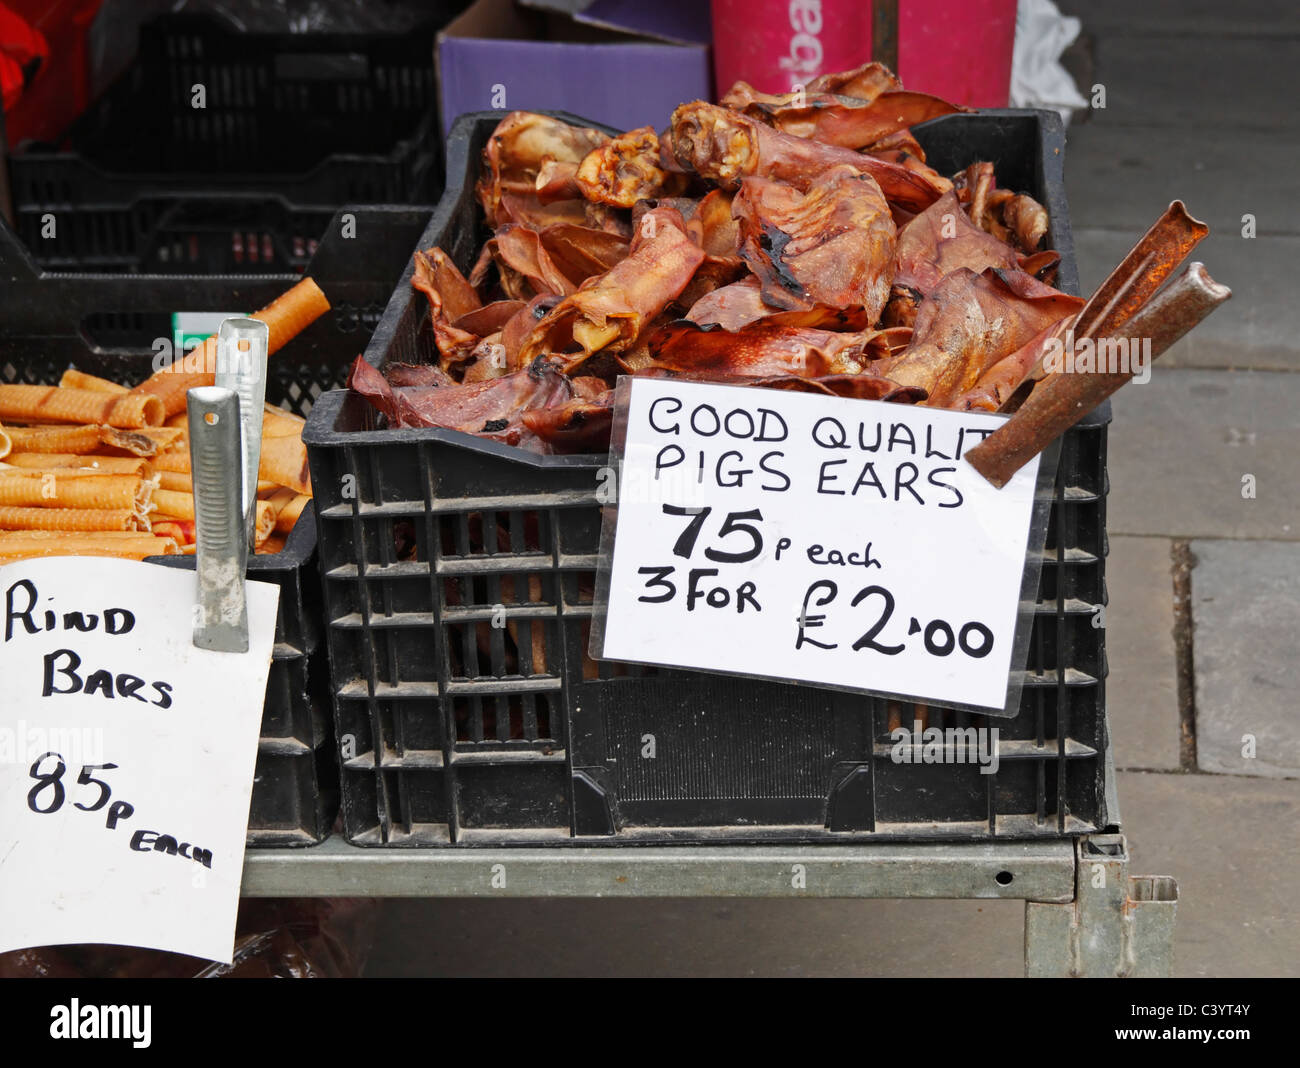 Cooked Pigs ears on Dog food market stall in England, United Kingdom Stock Photo